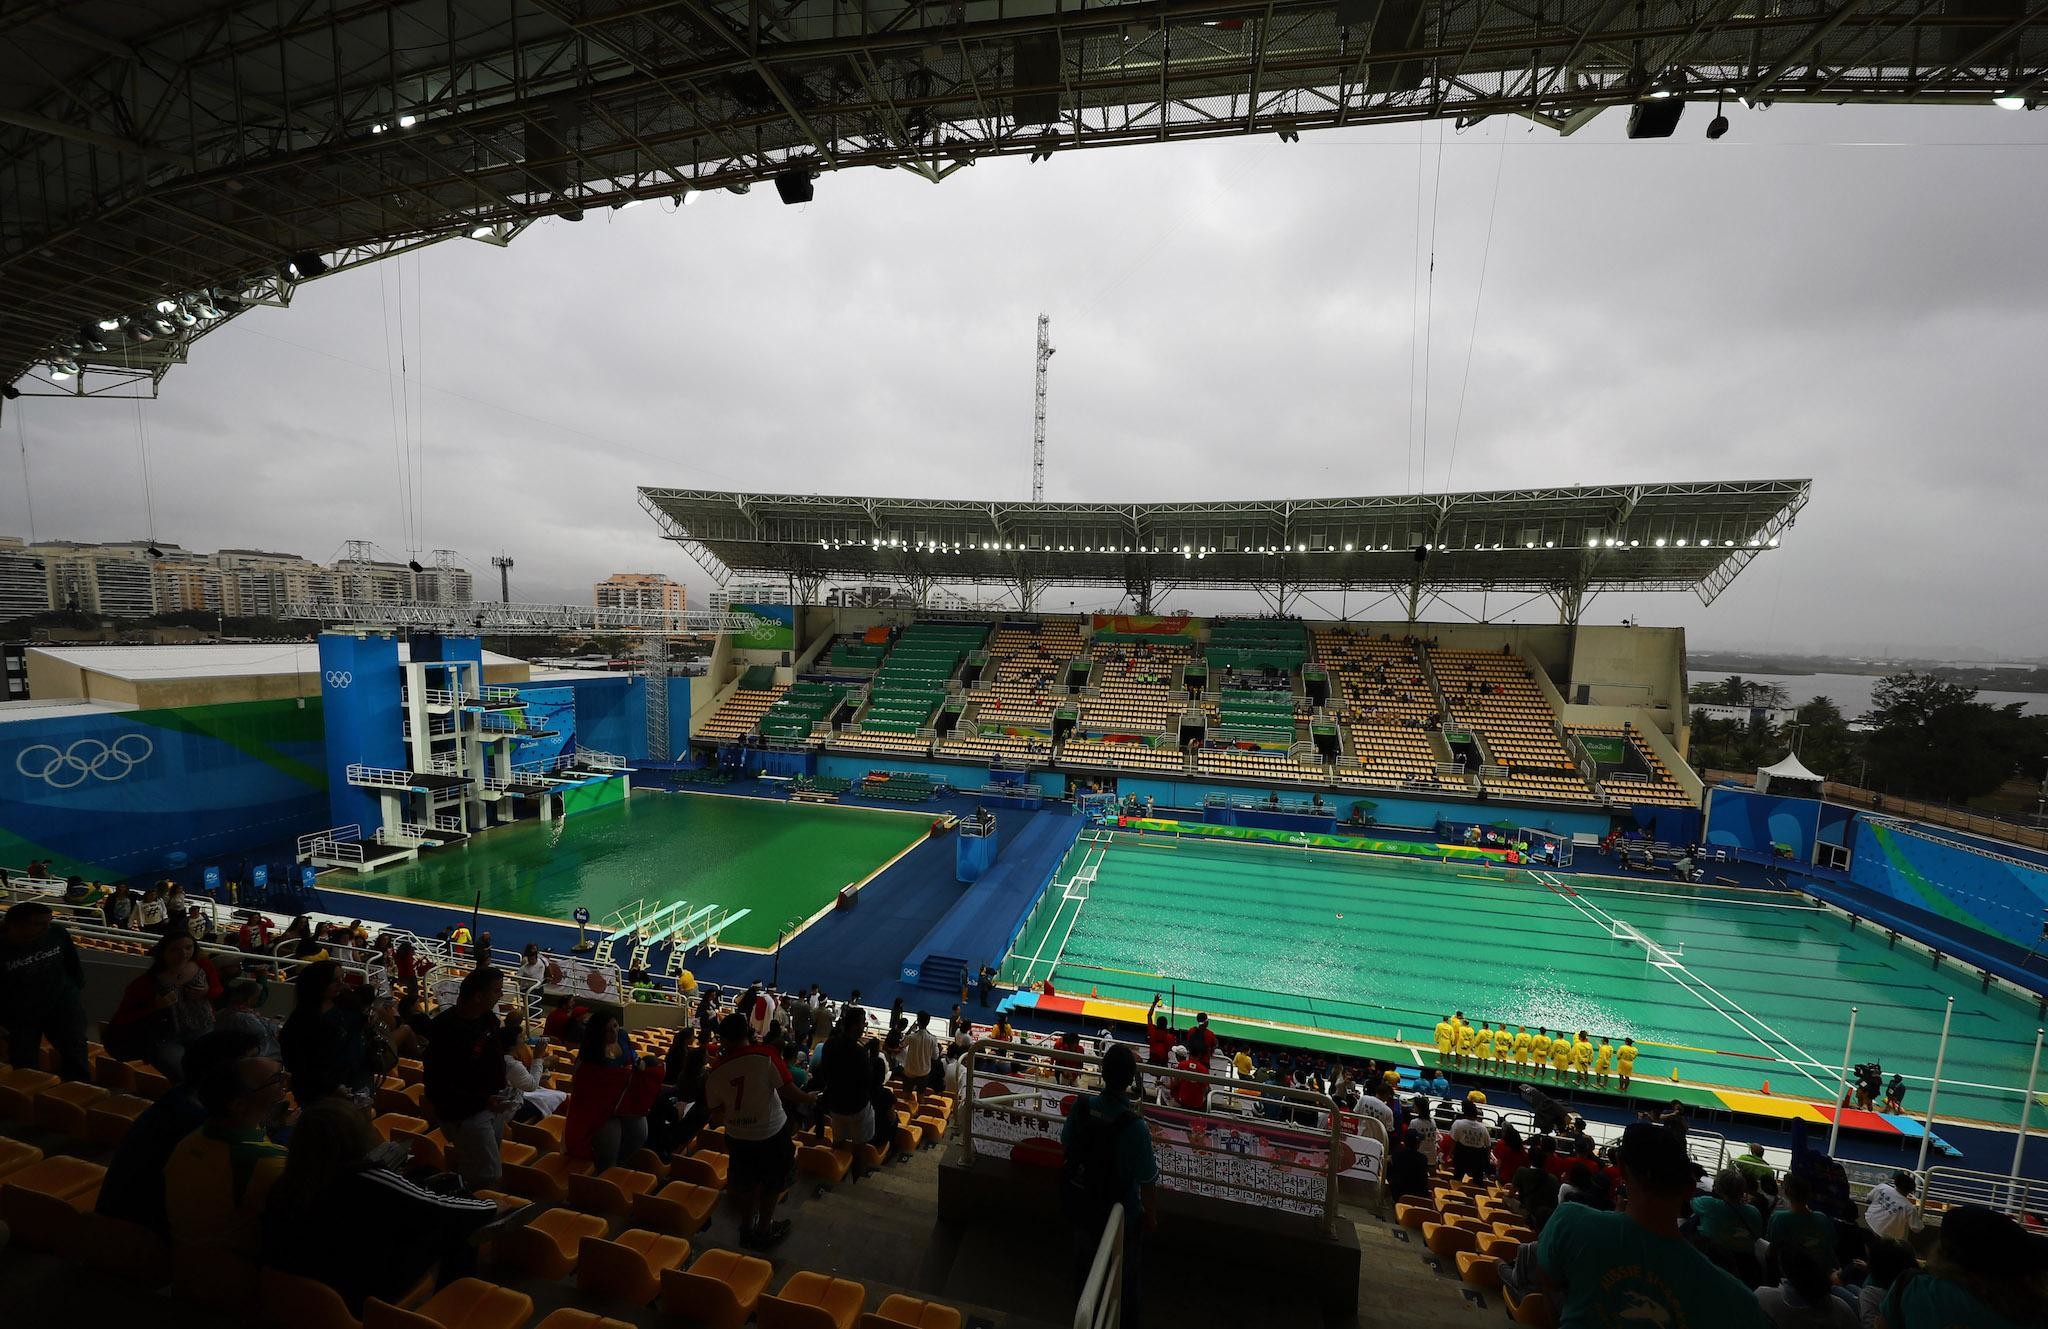 2048x1329 The Olympic diving pool is still green despite health warnings. “